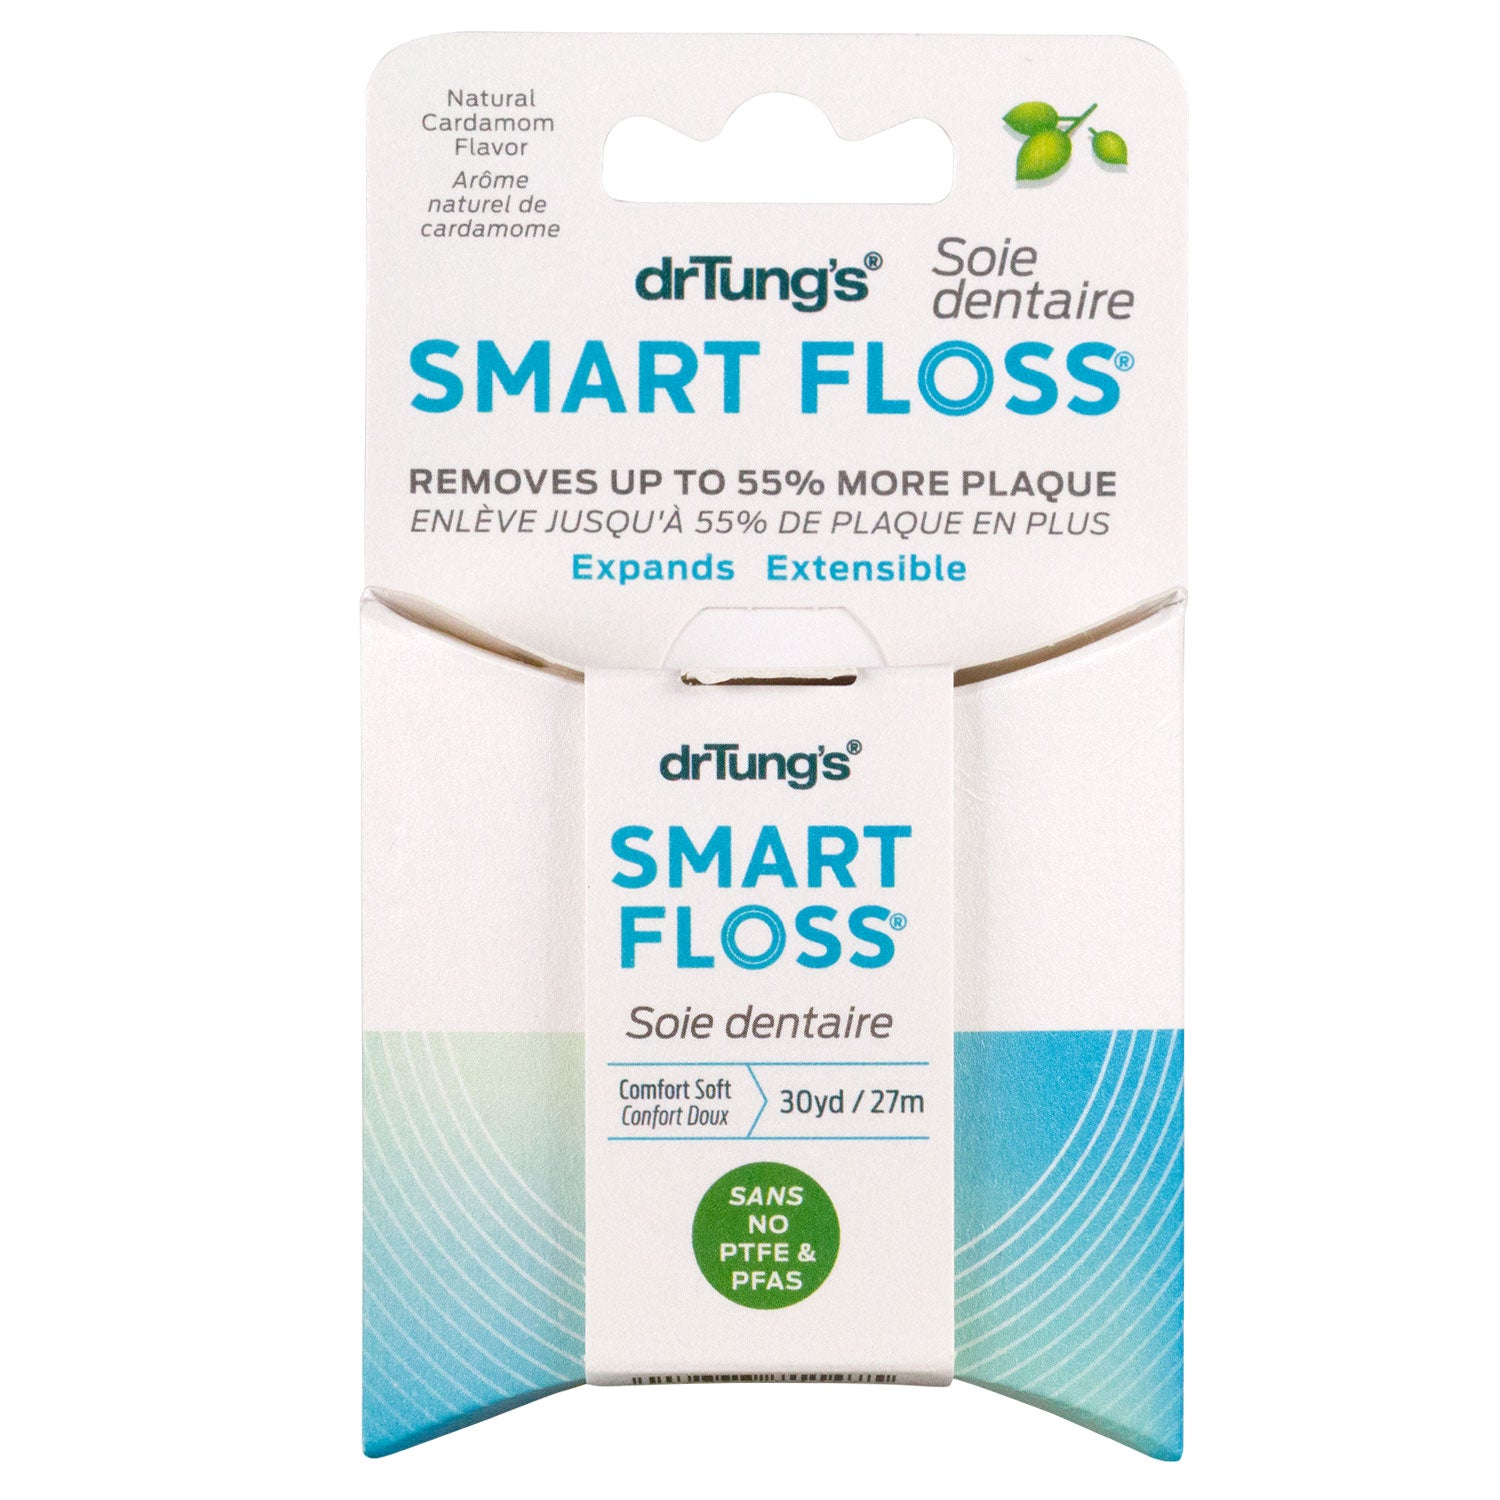 Smart Floss included